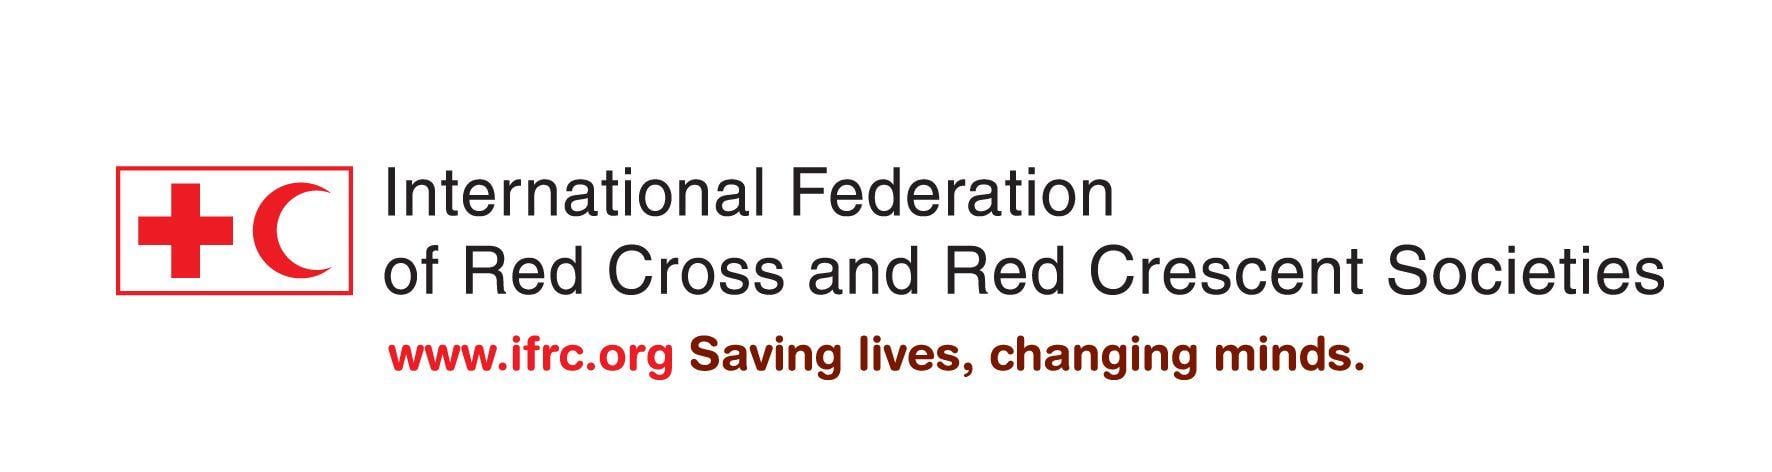 Small Red Cross Logo - Sri Lanka Red Cross | International Federation of Red Cross and Red ...